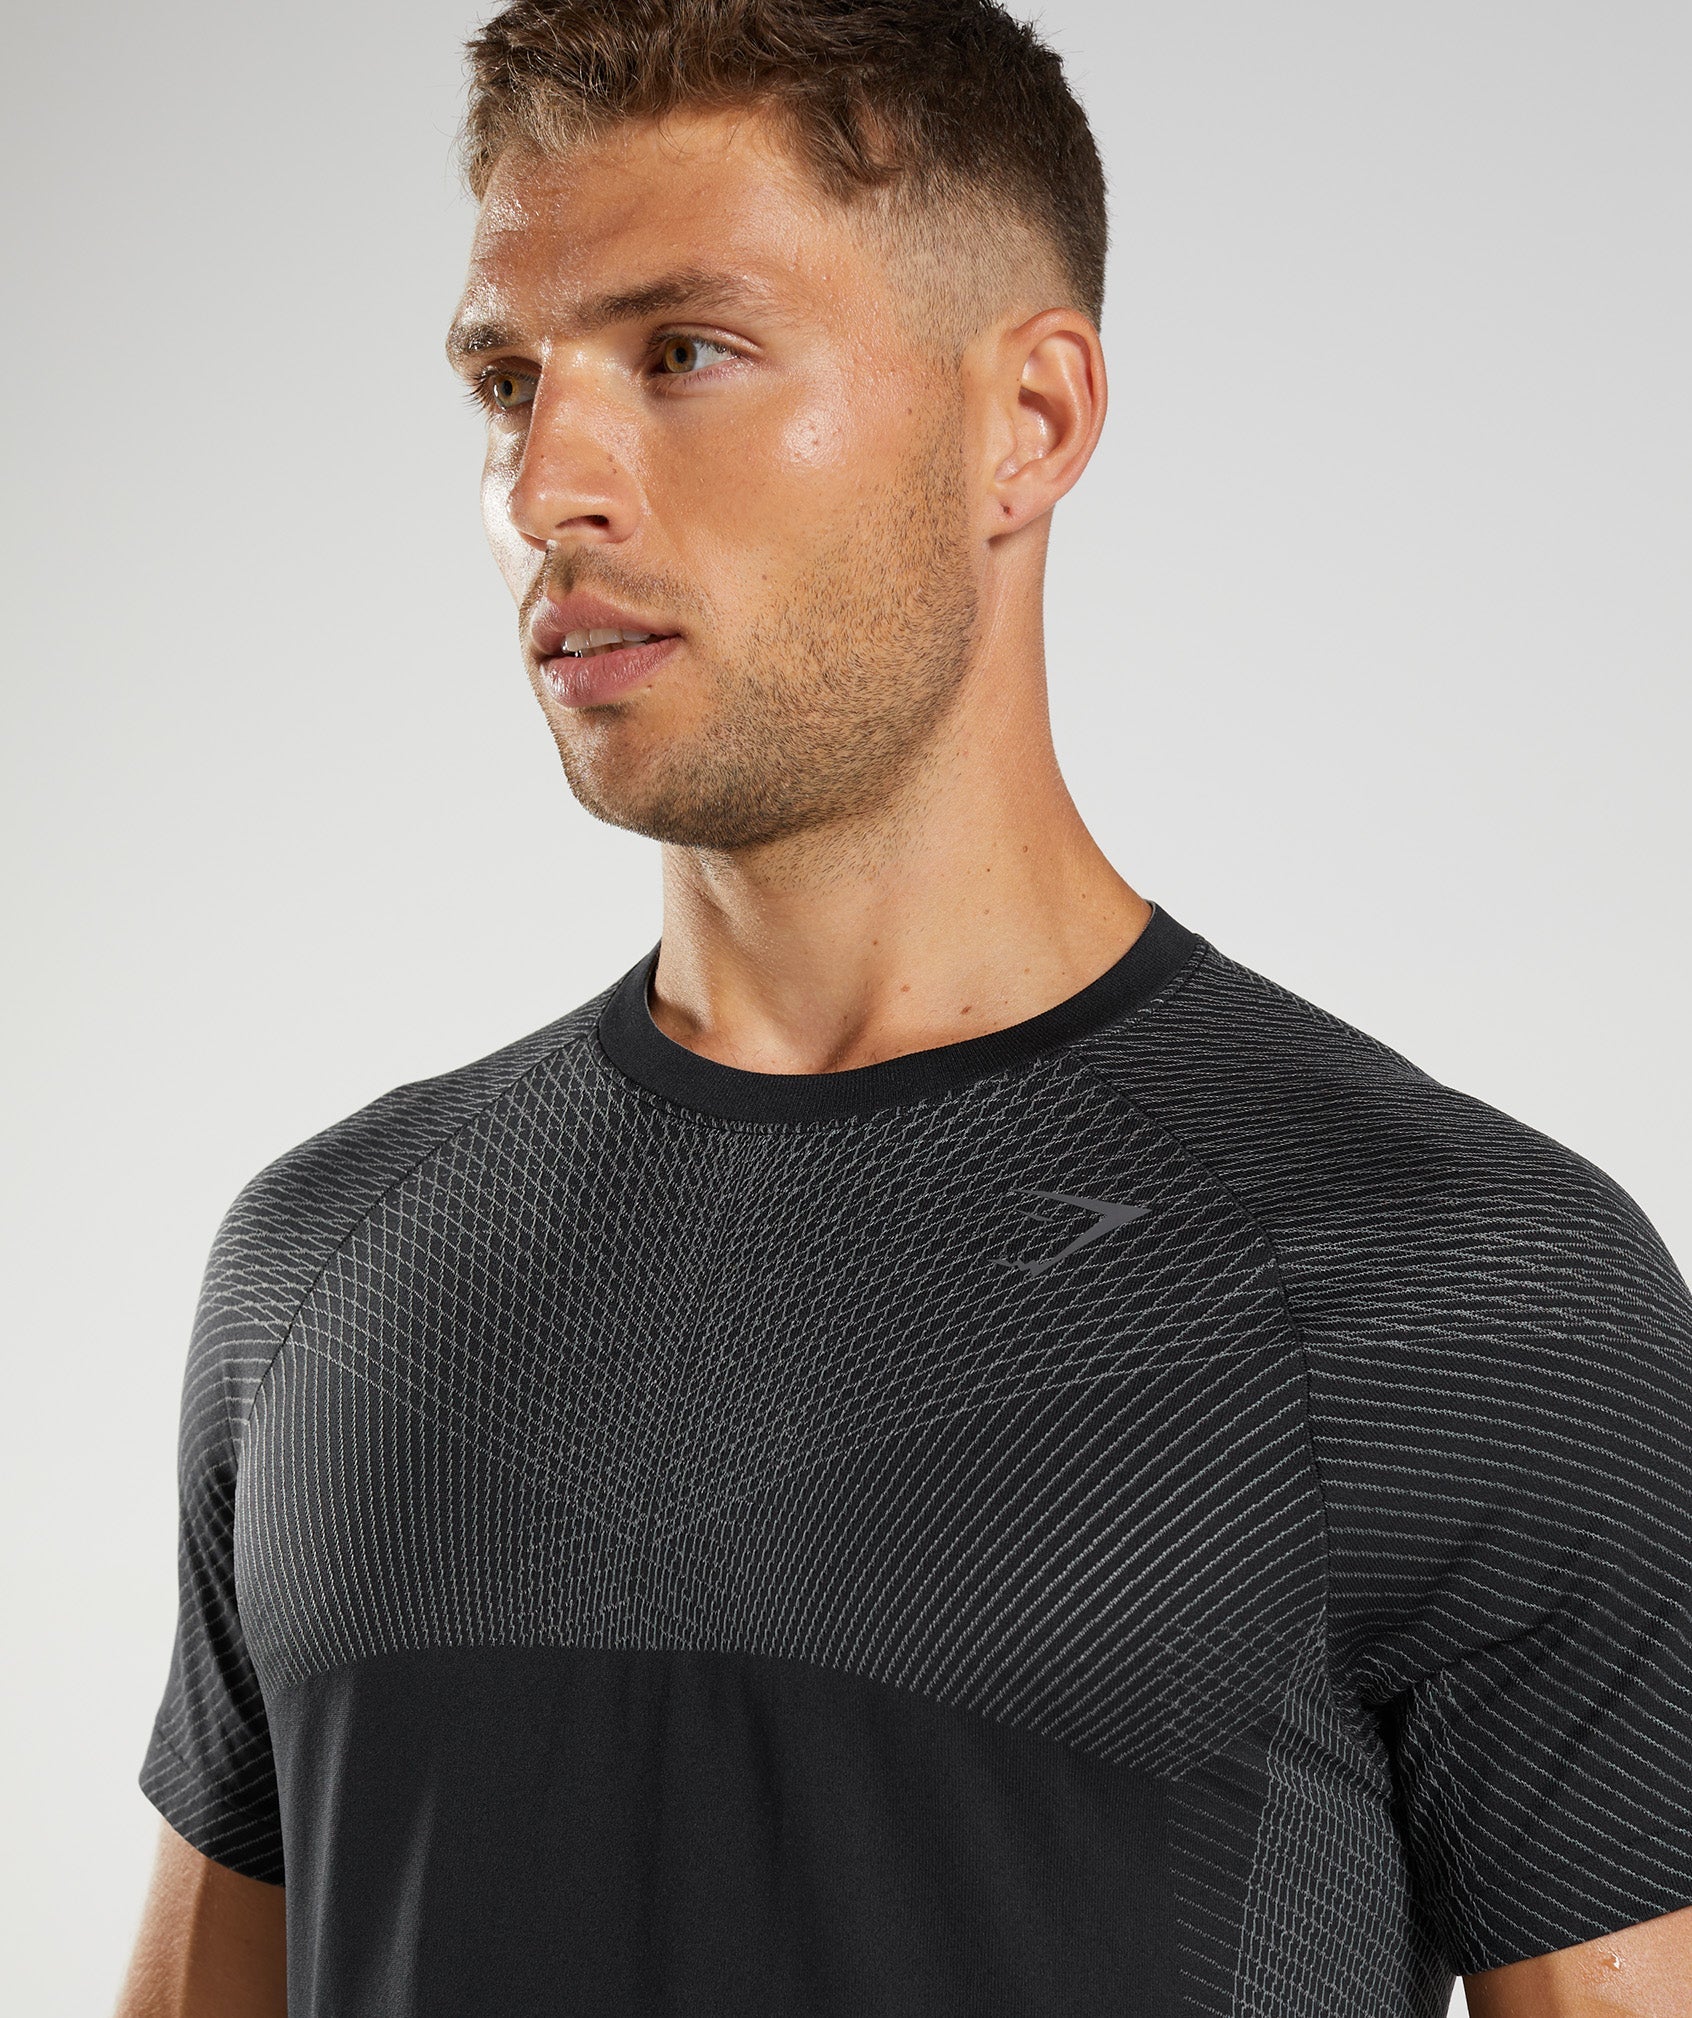 Apex Seamless T-Shirt in Black/Silhouette Grey - view 6